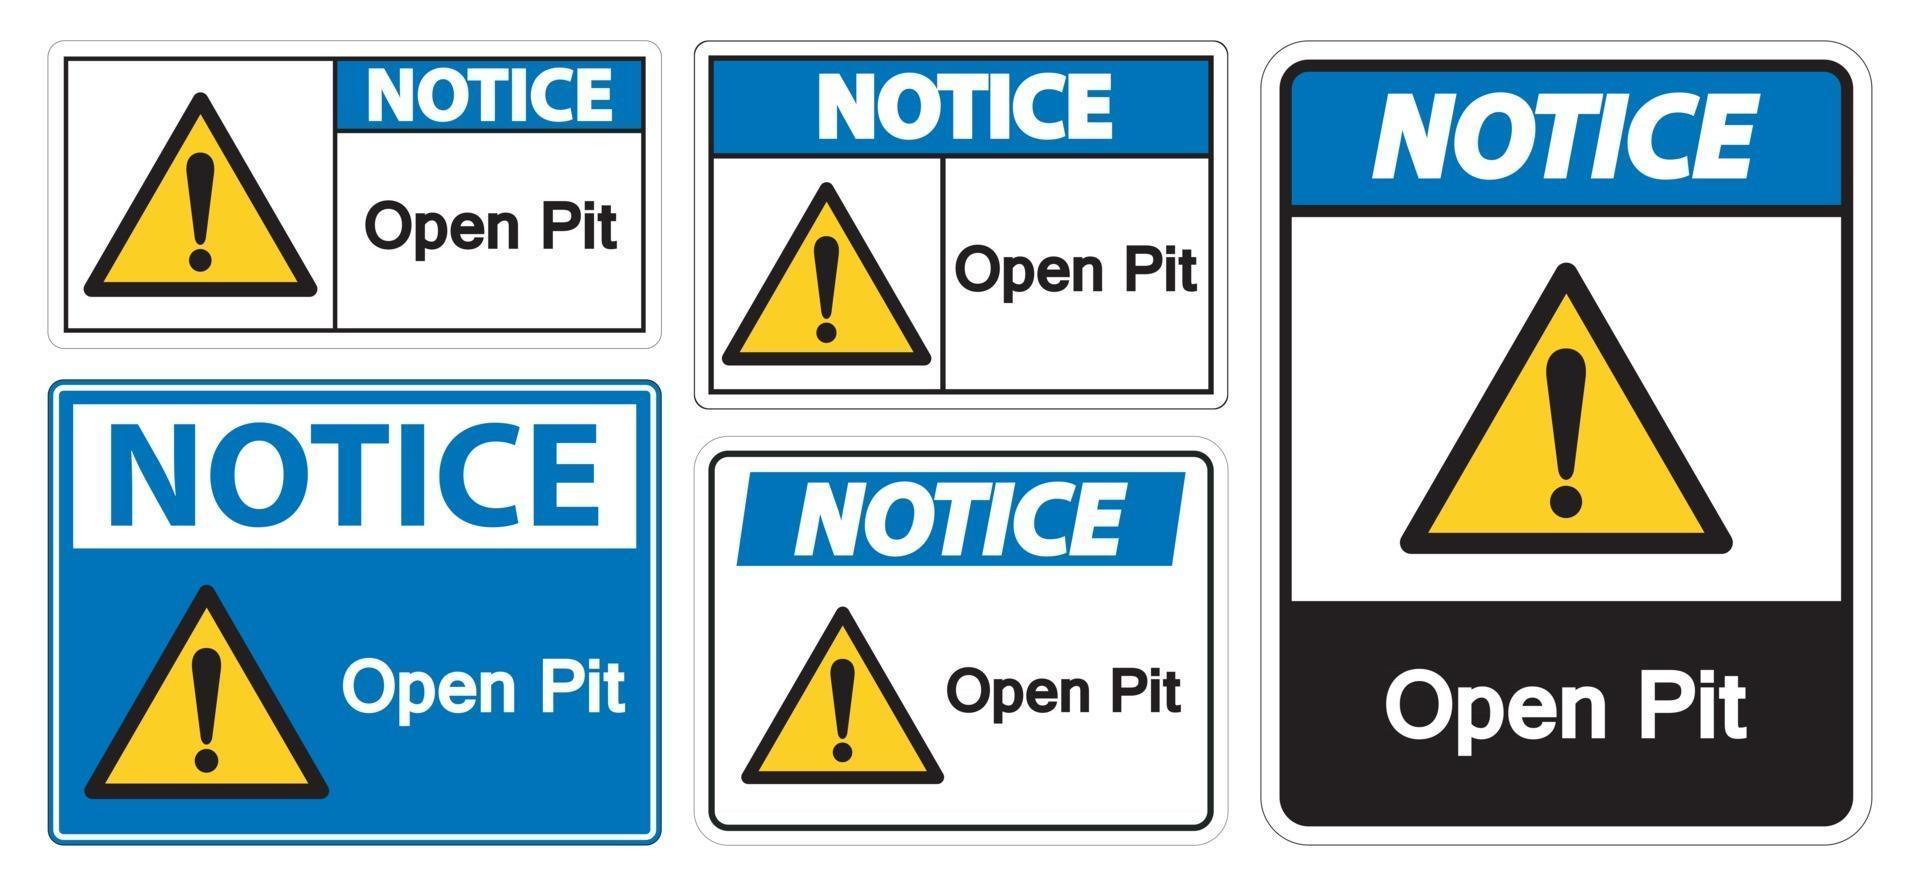 Notice Open Pit Sign Isolate On White Background,Vector Illustration EPS.10 vector